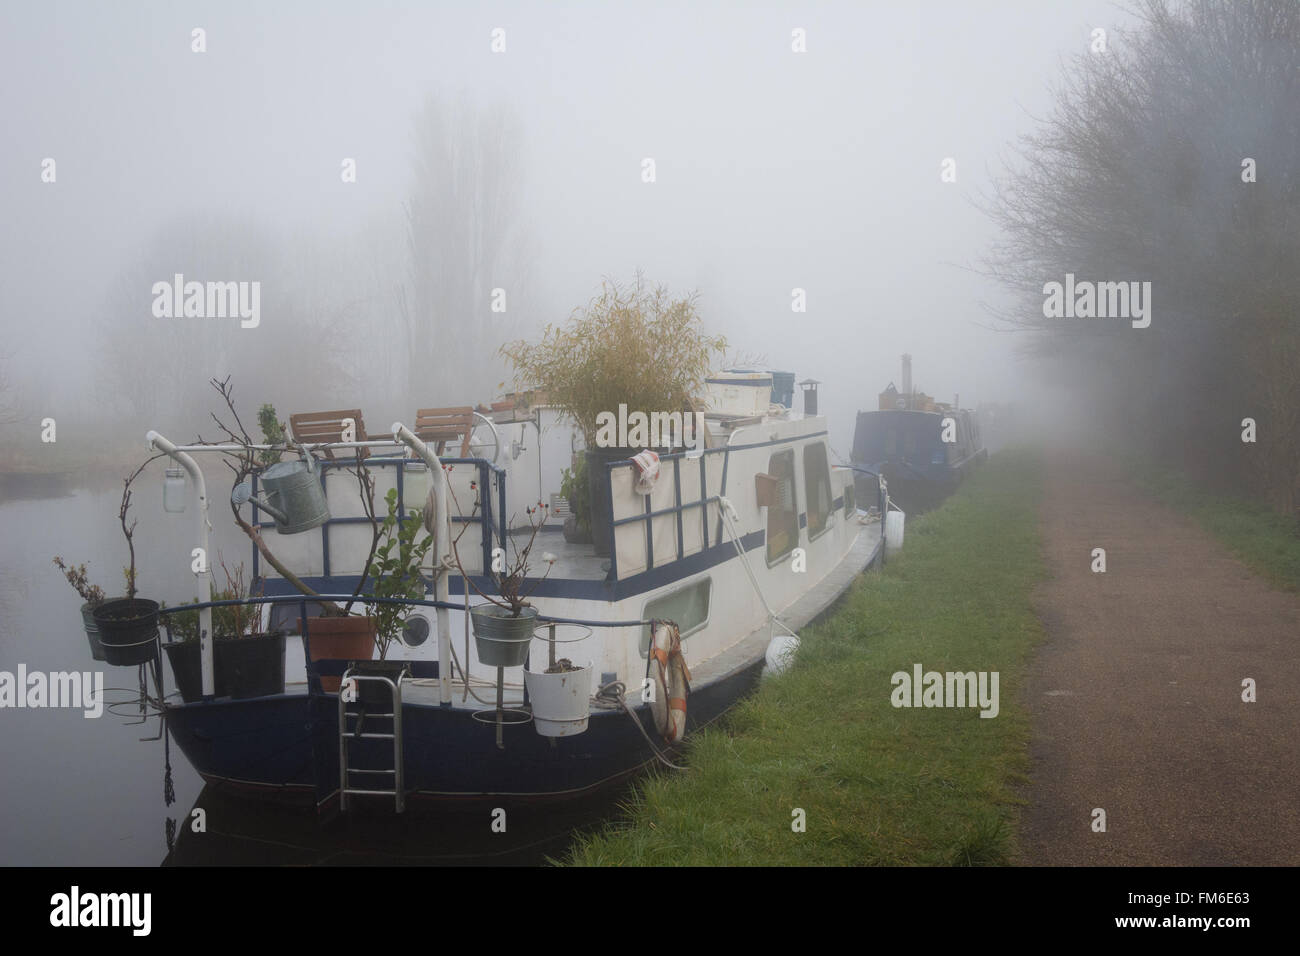 Houseboats in dense fog on the River Lee Navigation in Tottenham Credit: Patricia Phillips/Alamy Live News Stock Photo